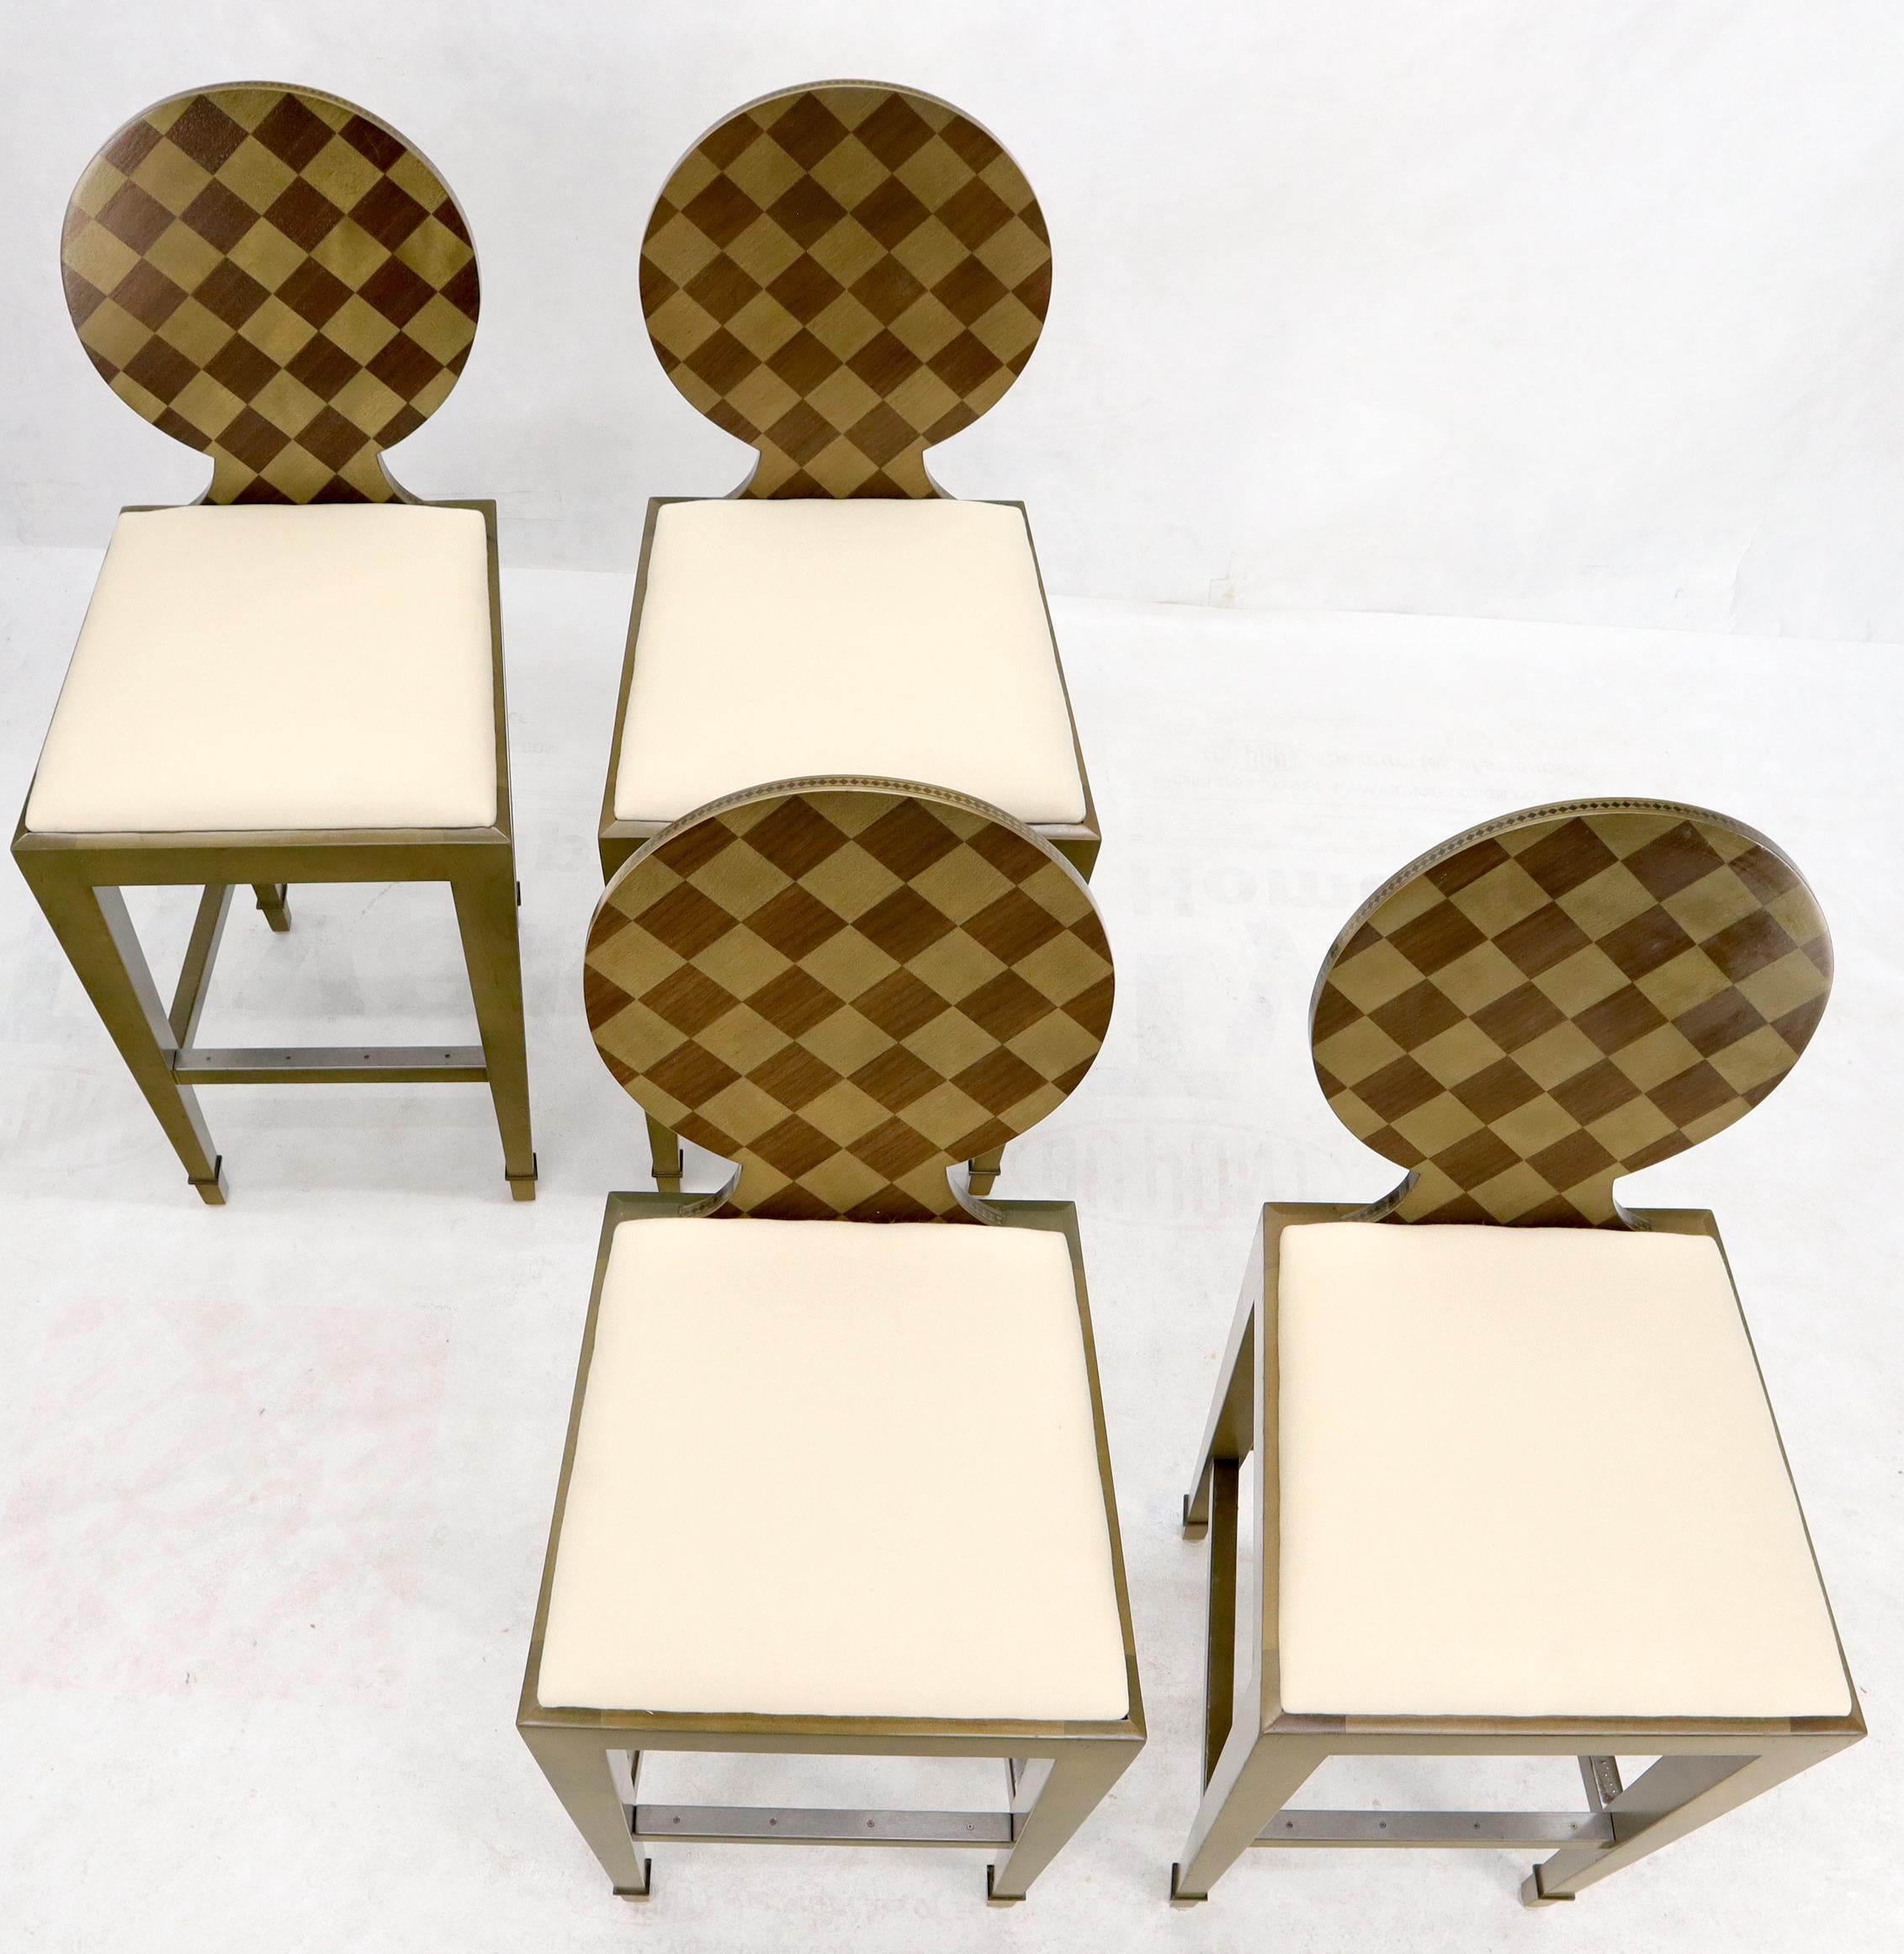 Set of four Mid-Century Modern Memphis style bar stools with newly upholstered seats. Good quality decorative bar stools from from c.1990s.